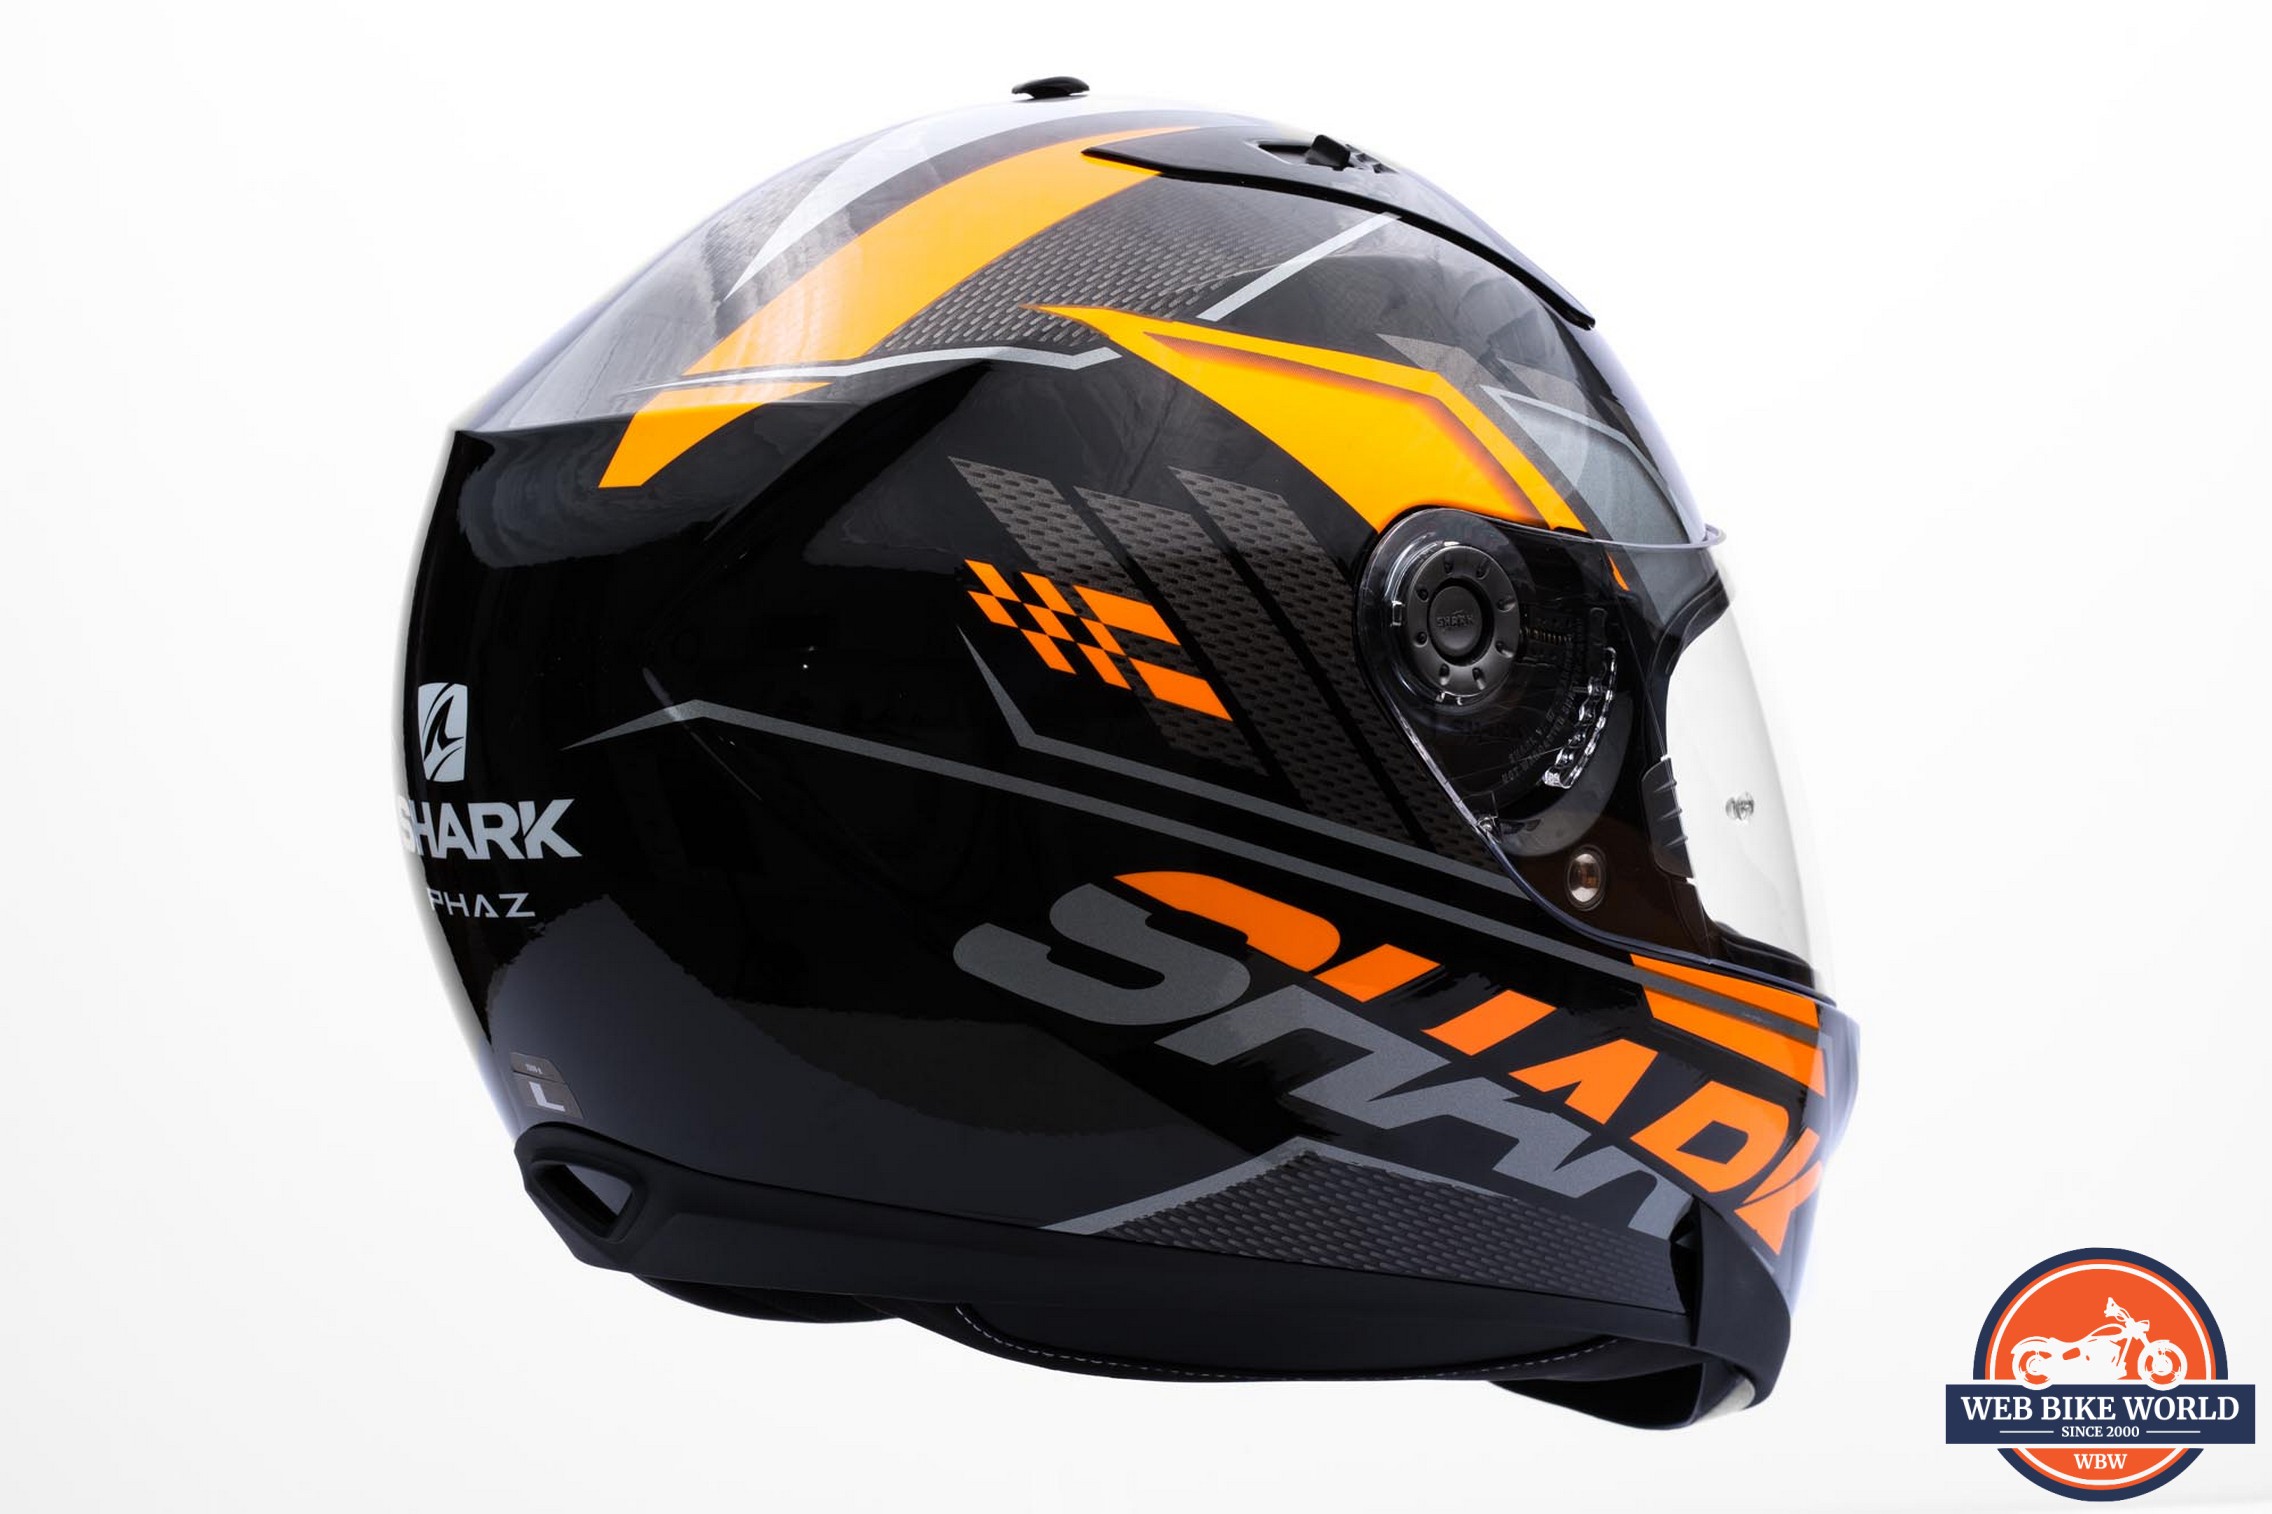 Right side view of the Shark Ridill 1.2 Helmet